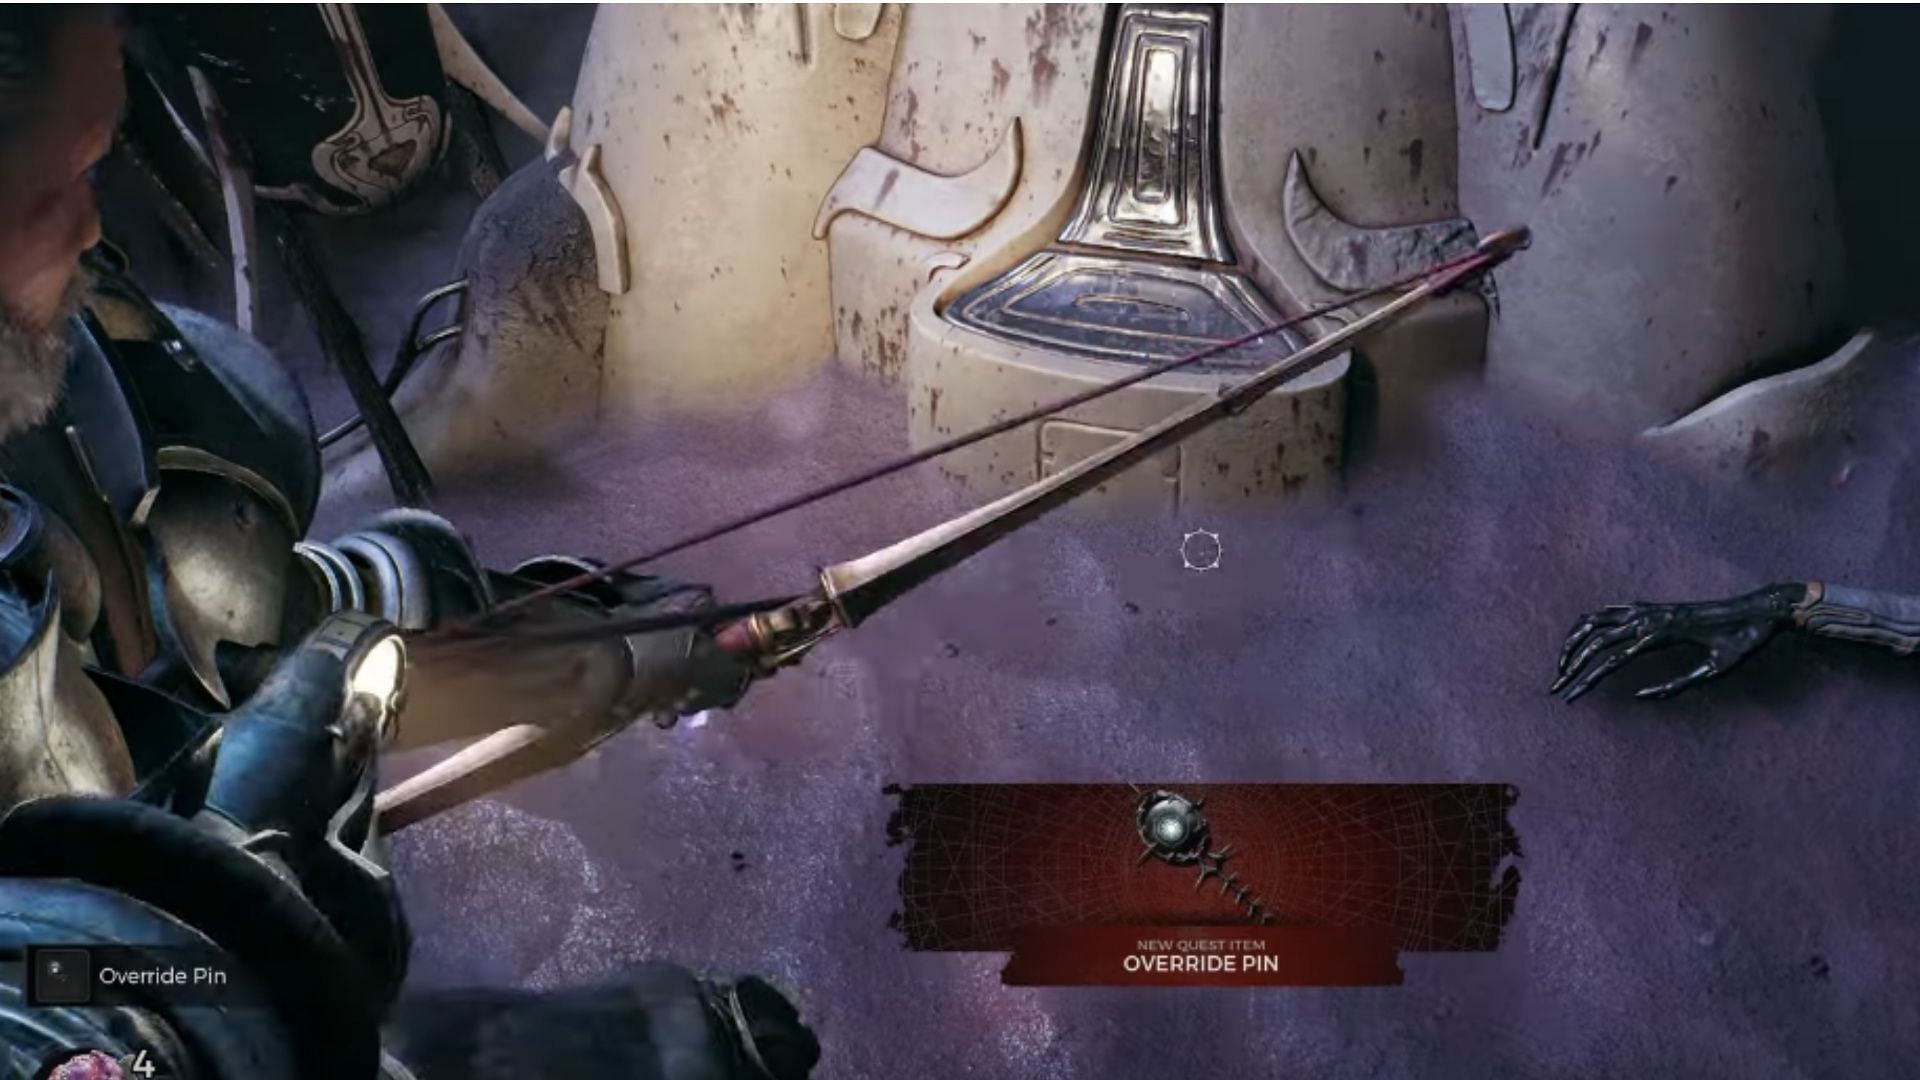 Obtain a key item known as the Override Pin (Image via Gearbox Software)